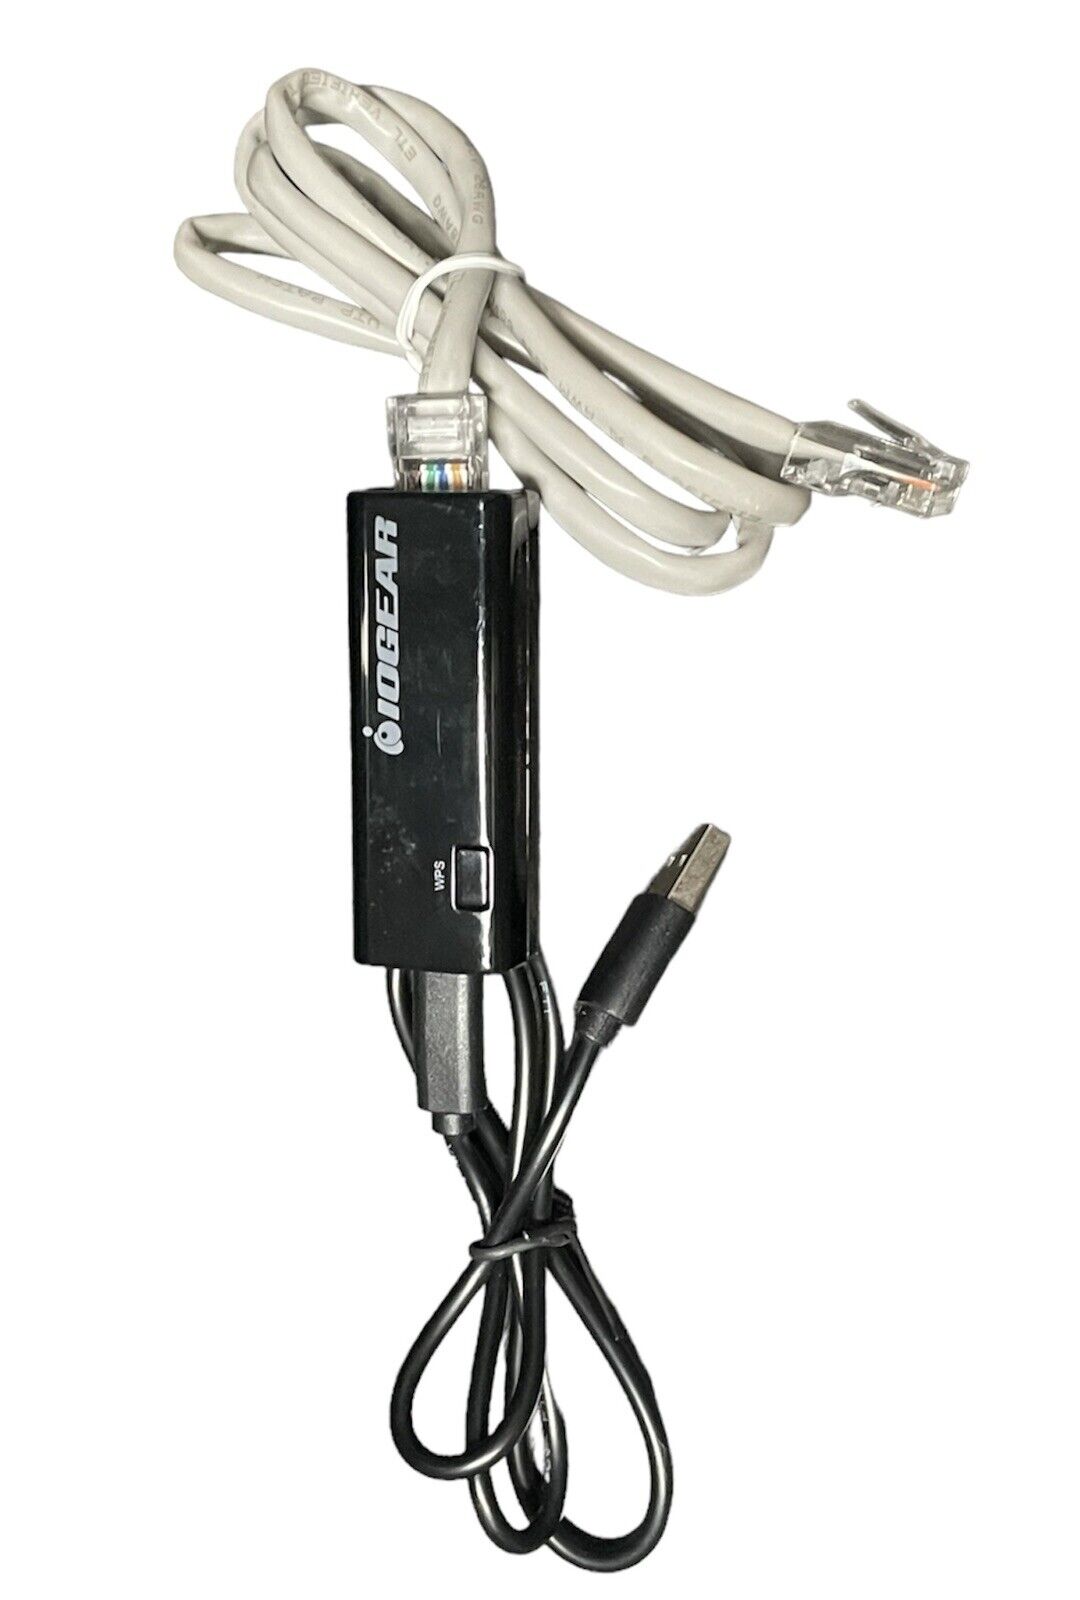 IOGEAR Ethernet-2-WiFi - Model GWU637 2.4GHz Wi-Fi Adapter Cables Included